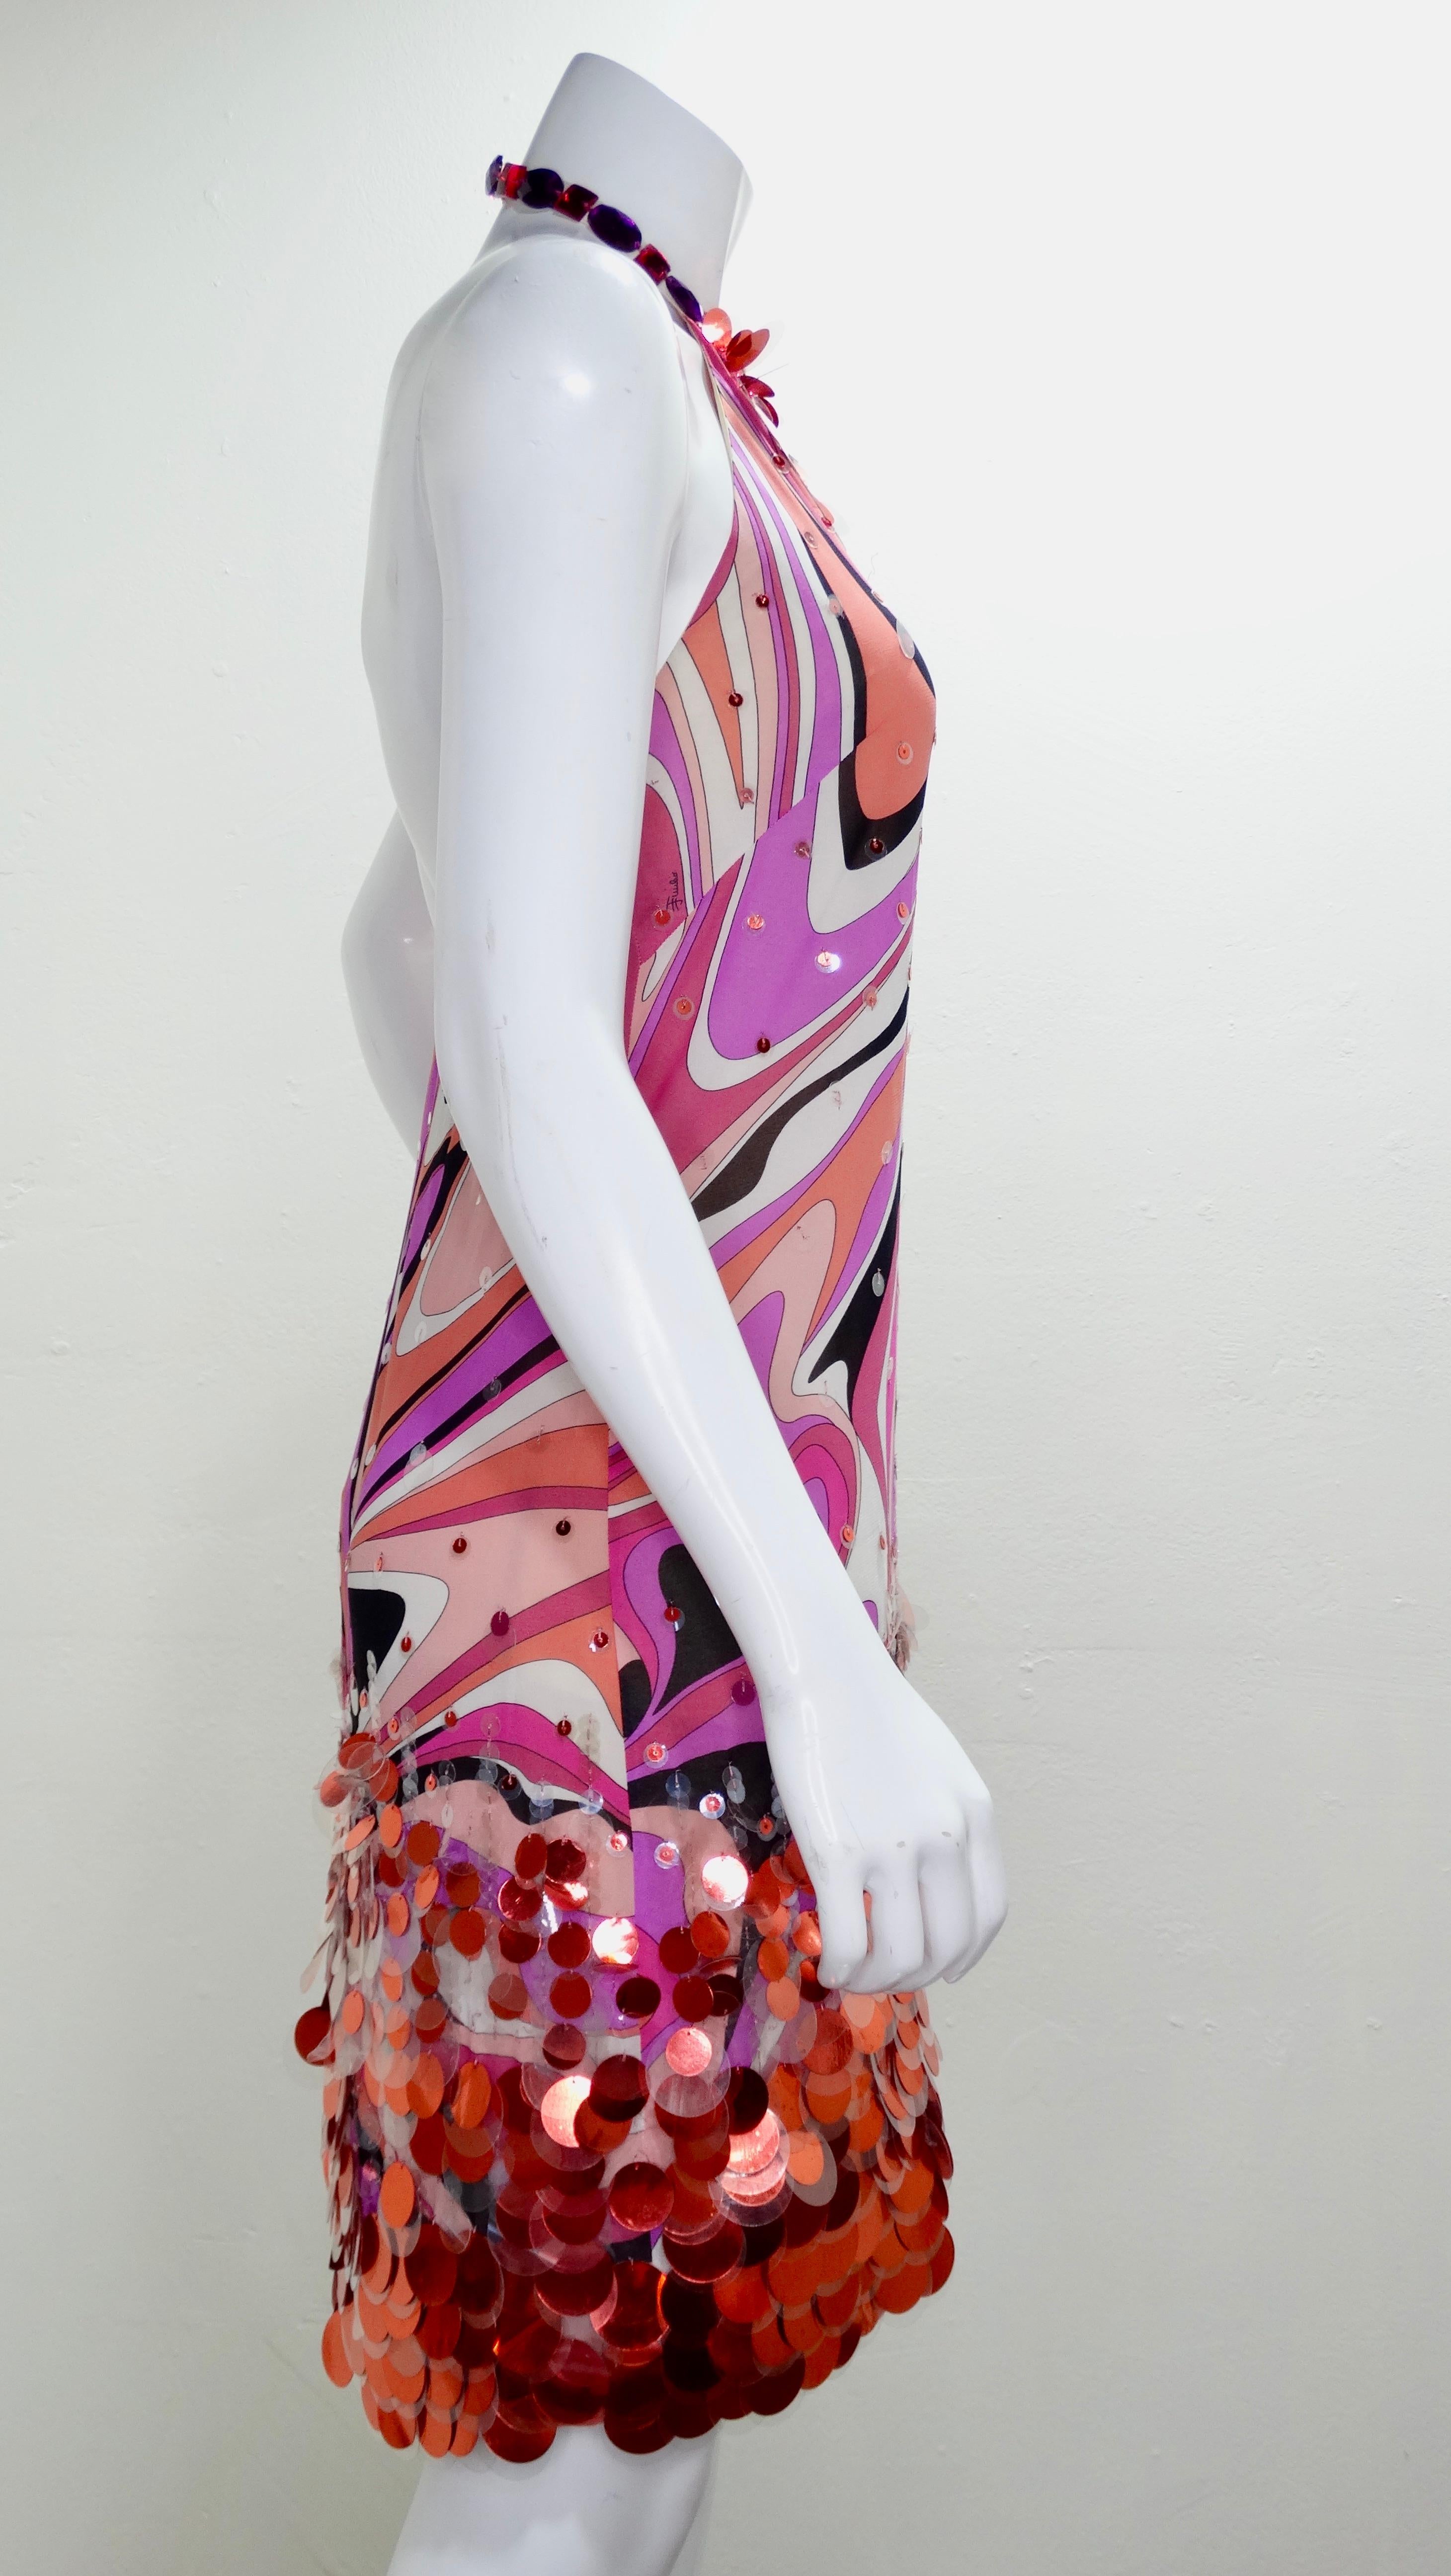 Show off in this Pucci day or night! Circa early 2000s, this Pucci mini dress features one of Pucci's signature abstract motifs in pinks, purple, white and black. Featured at the bottom are clear and pink sequins with an embellished halter top. A